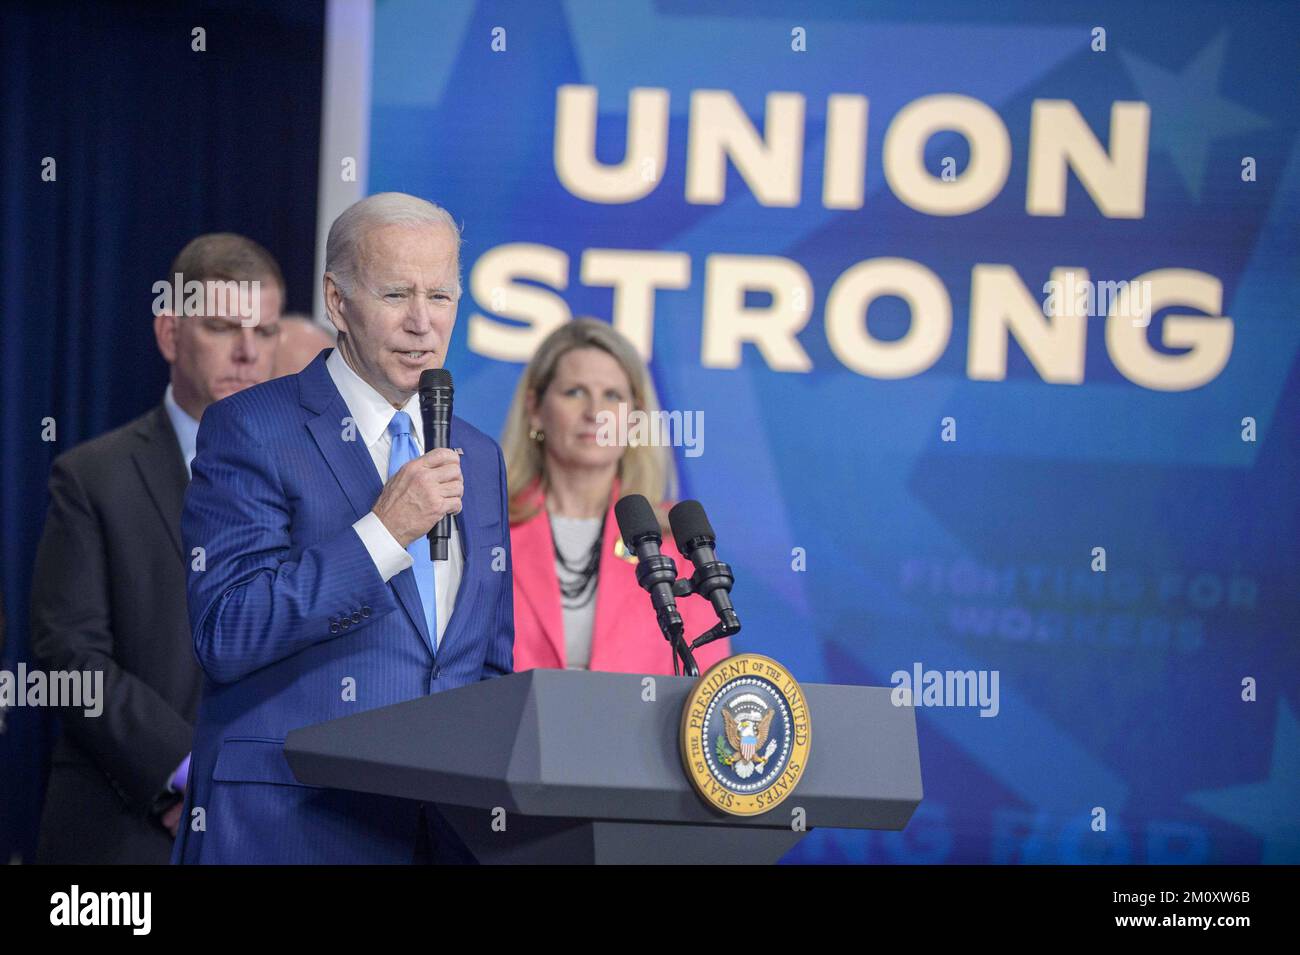 Washington, United States. 08th Dec, 2022. President Joe Biden speaks during a press conference on building a stronger economy for union workers and retirees in the South Court Auditorium at the White House in Washington, DC on Thursday, December 8, 2022. President Biden announce $36 billion for the Central States Pension Fund, preventing drastic cuts to the hard-earned pensions of over 350,000 union workers and retirees. Photo by Bonnie Cash/UPI Credit: UPI/Alamy Live News Stock Photo